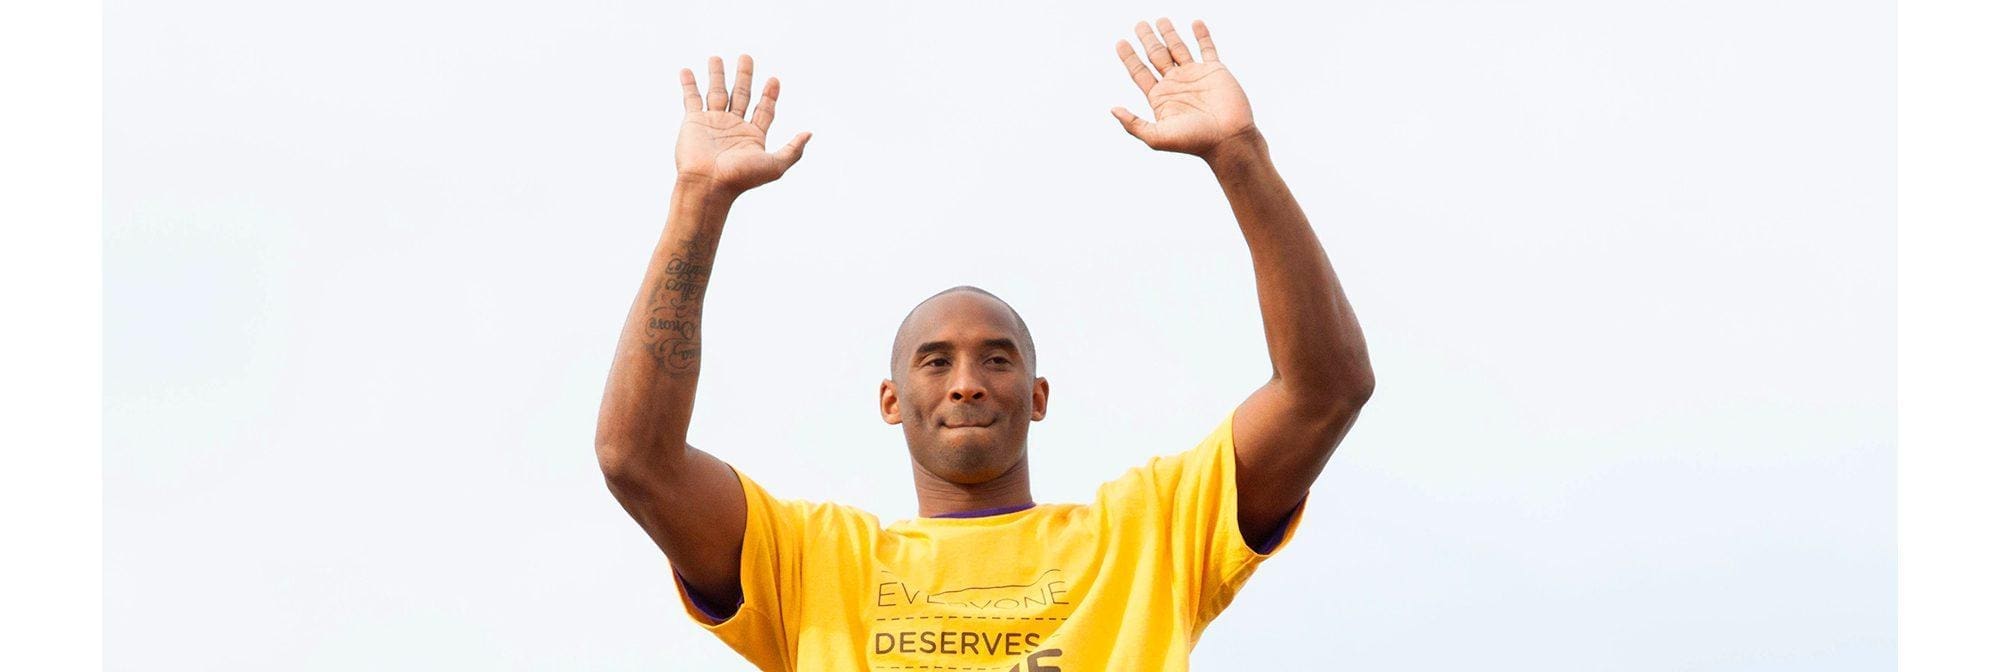 Official los angeles Lakers Kobe Bryant full circle the black